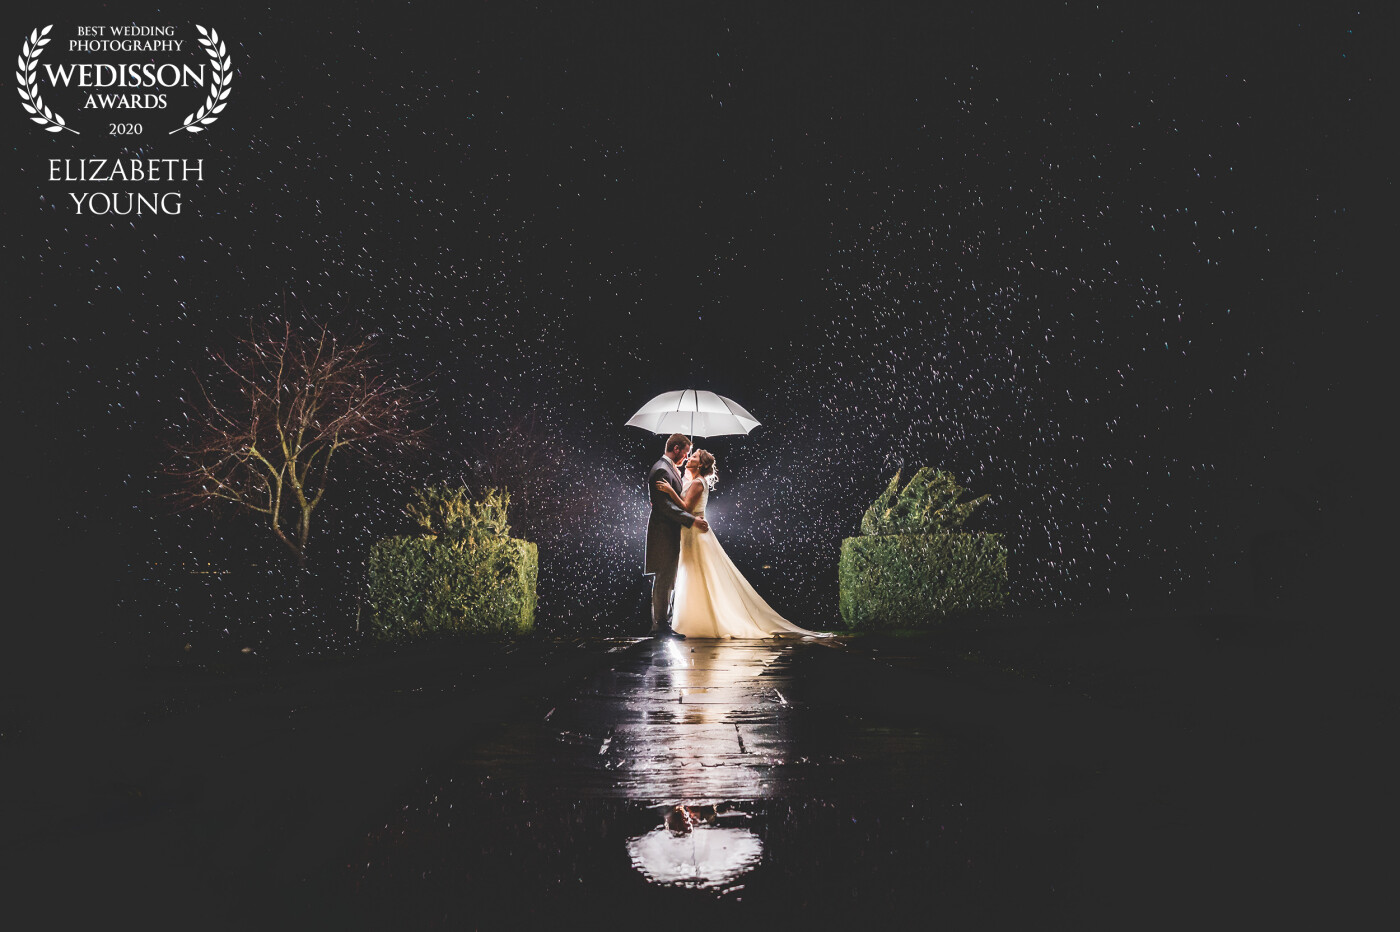 It poured down with rain most of the day for Amy & Matt but this didn't deter them from heading out to get this shot. They wanted something dramatic and the rain was very welcome!